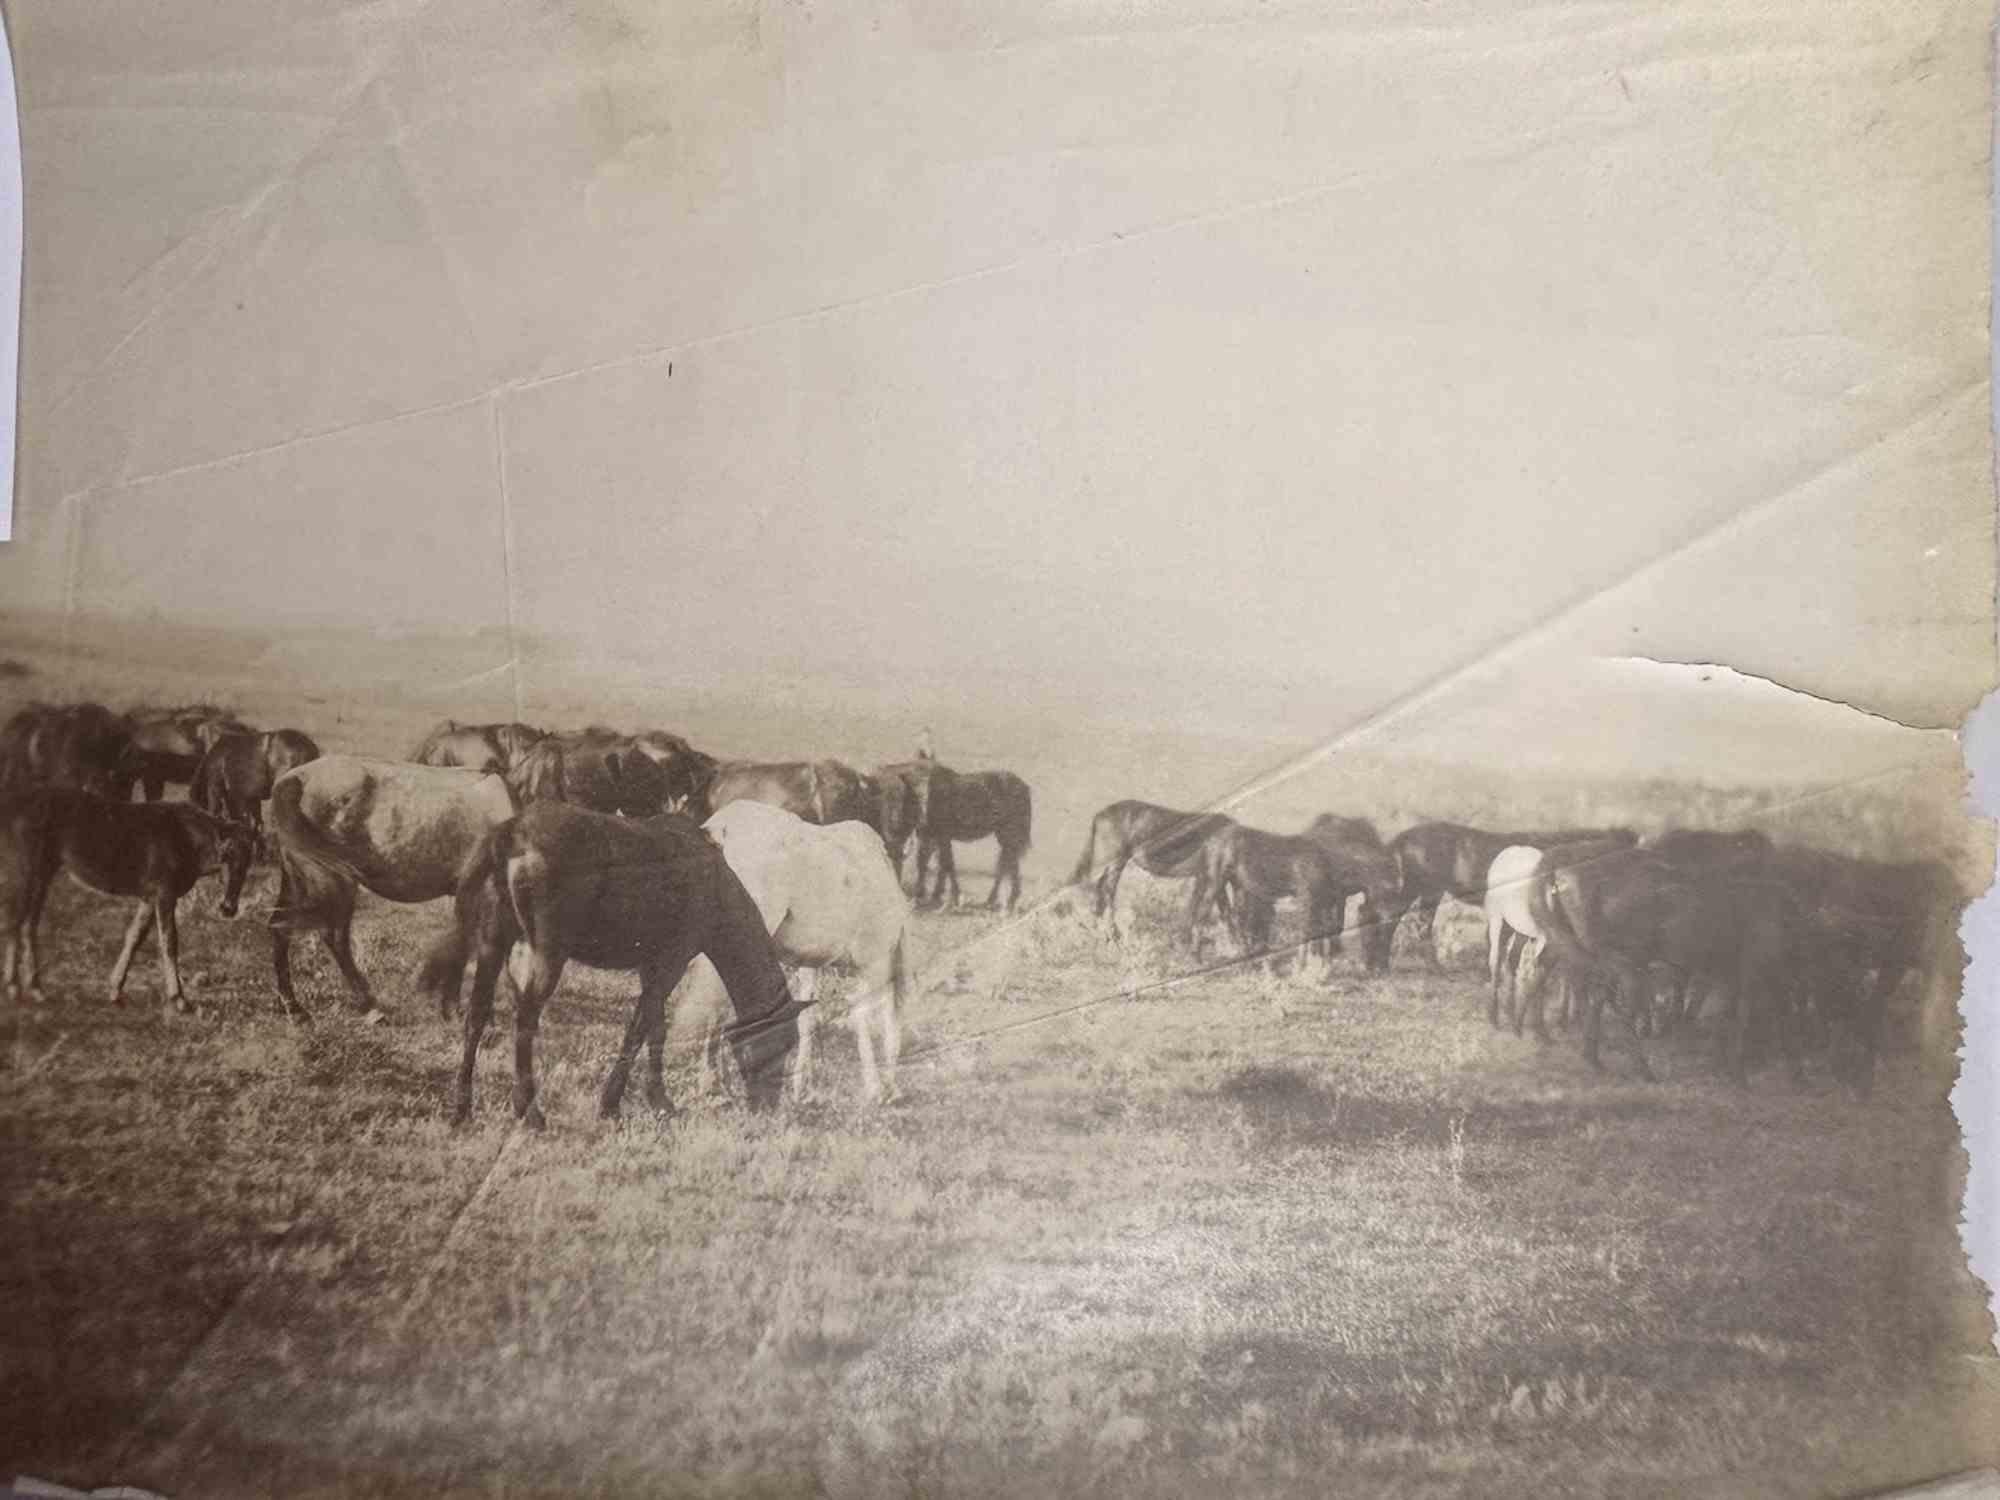 Unknown Figurative Photograph - Old Days - Horses in the Tuscan Maremma - Vintage Photo - Mid-20th Century